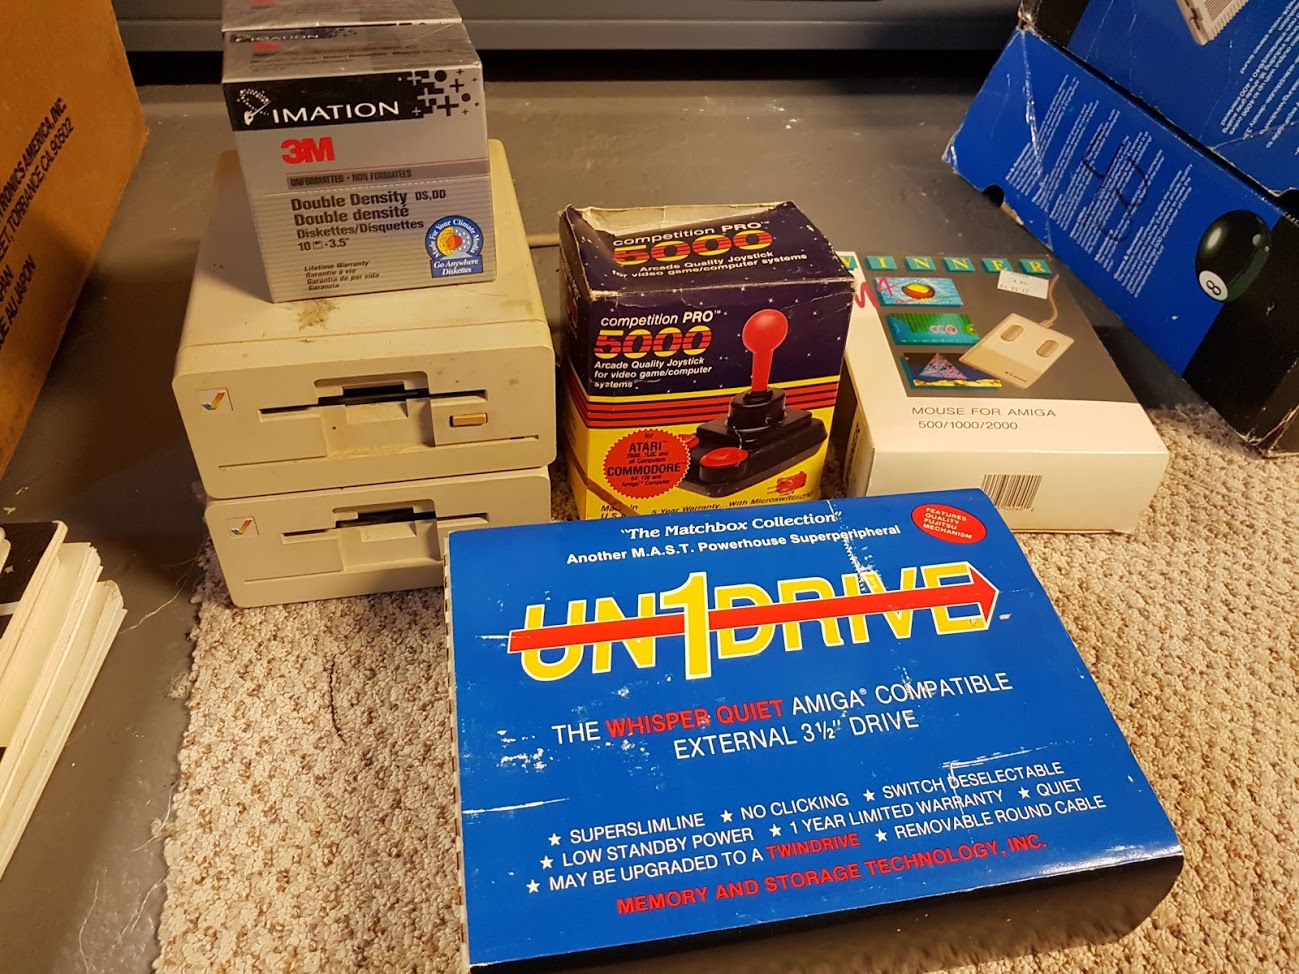 "Some more stuff. Two Amiga floppies and a generic external drive. Boxed joystick and a funny 3rd party mouse. Also, two unopened boxes of floppies."